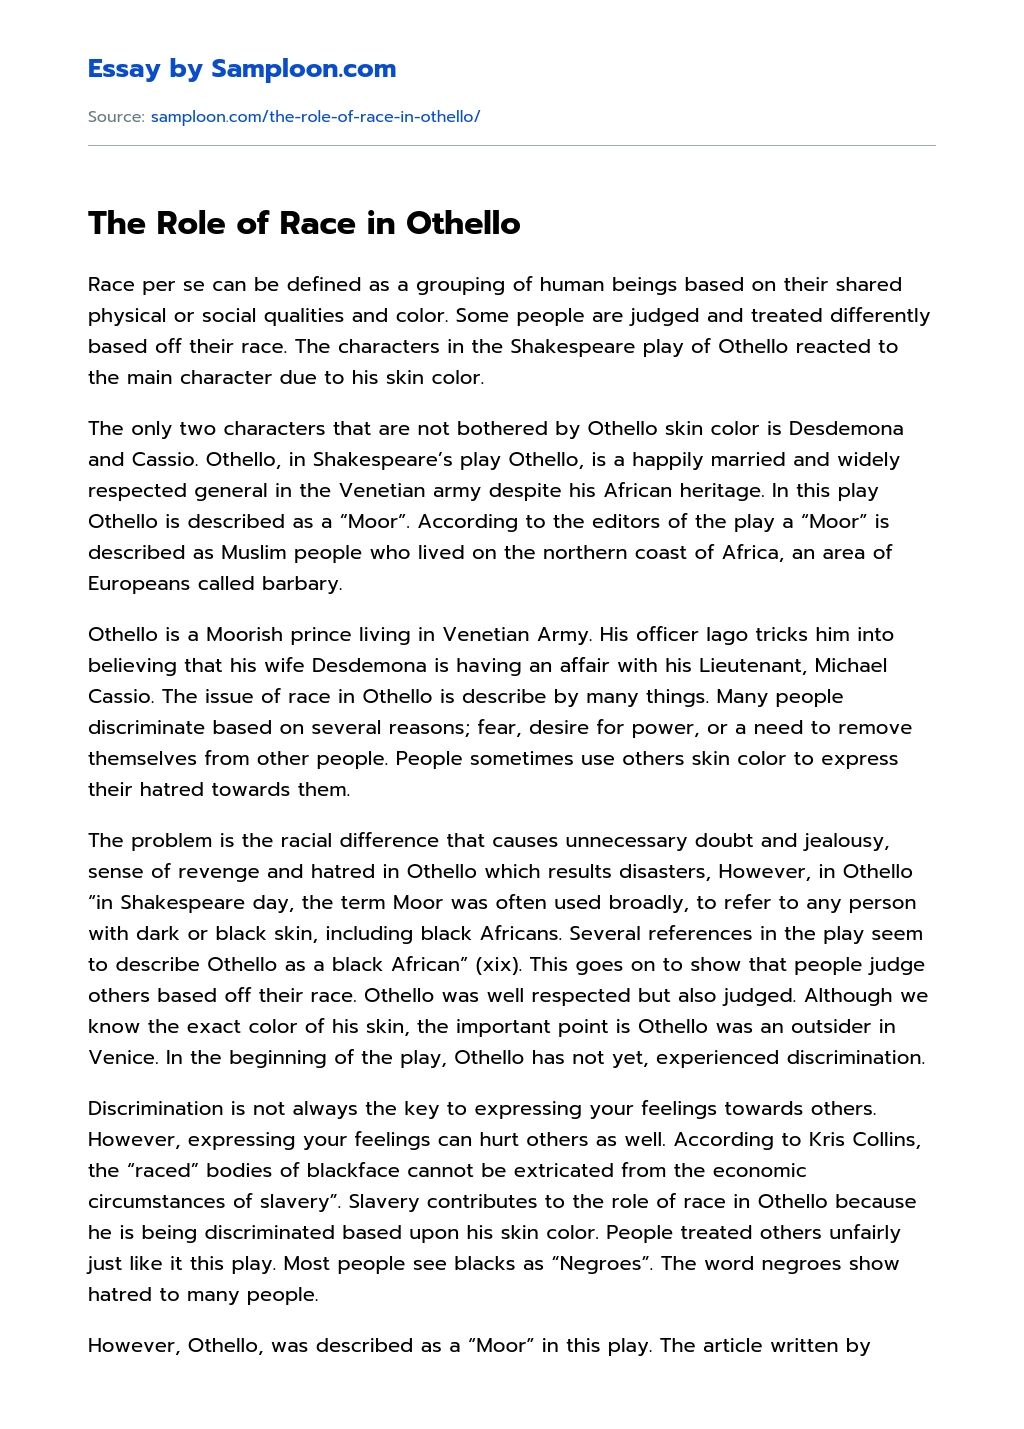 The Role of Race in Othello essay